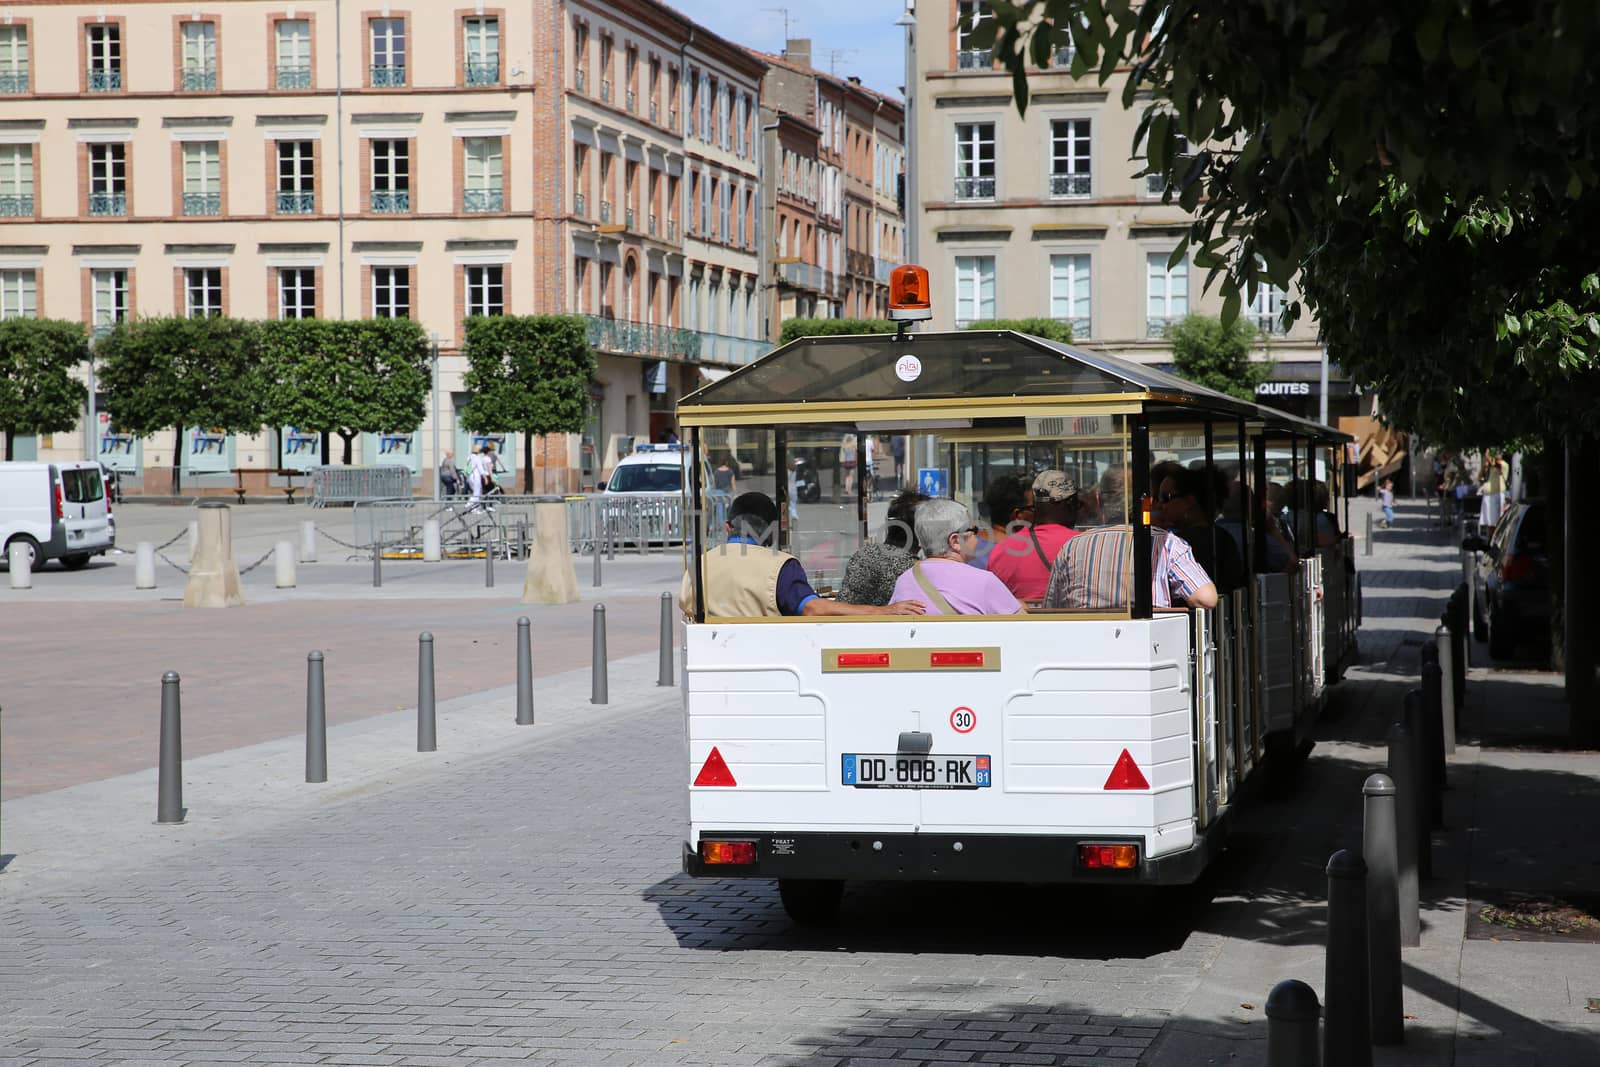 Rear View of a White Trackless Train in France by bensib